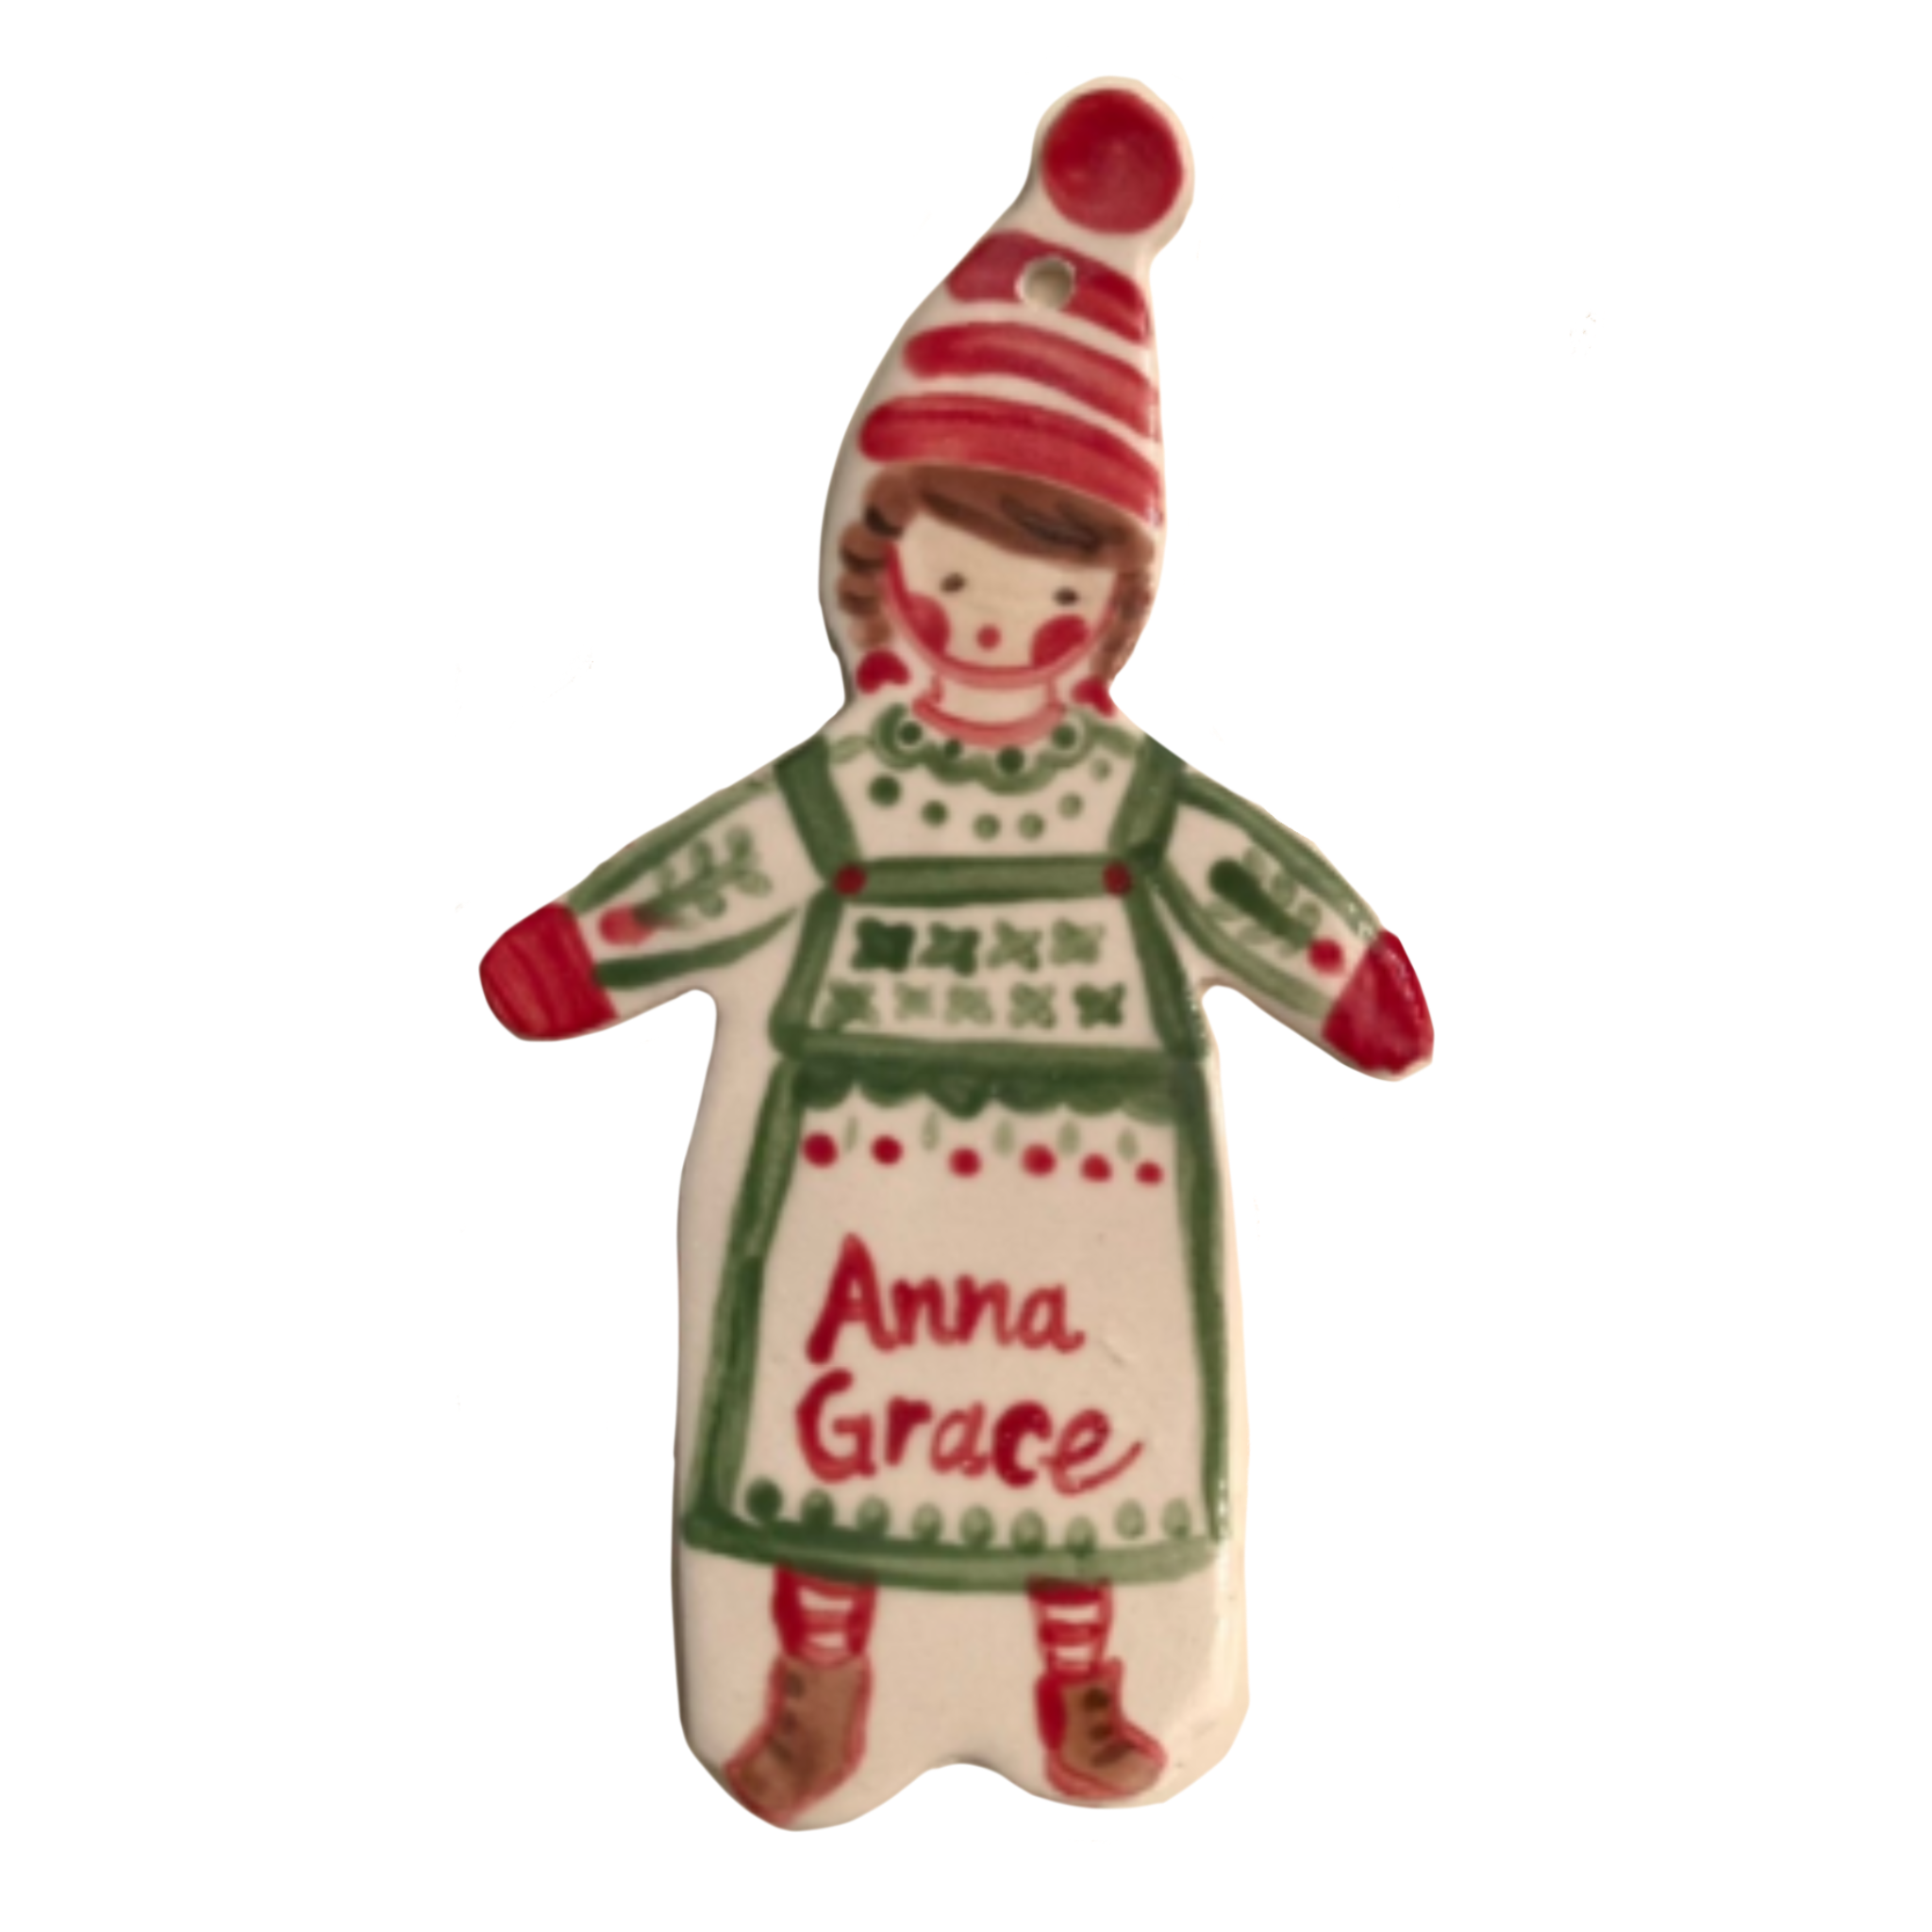 Green Pinafore Girl Ornament - Tricia Lowenfield Design